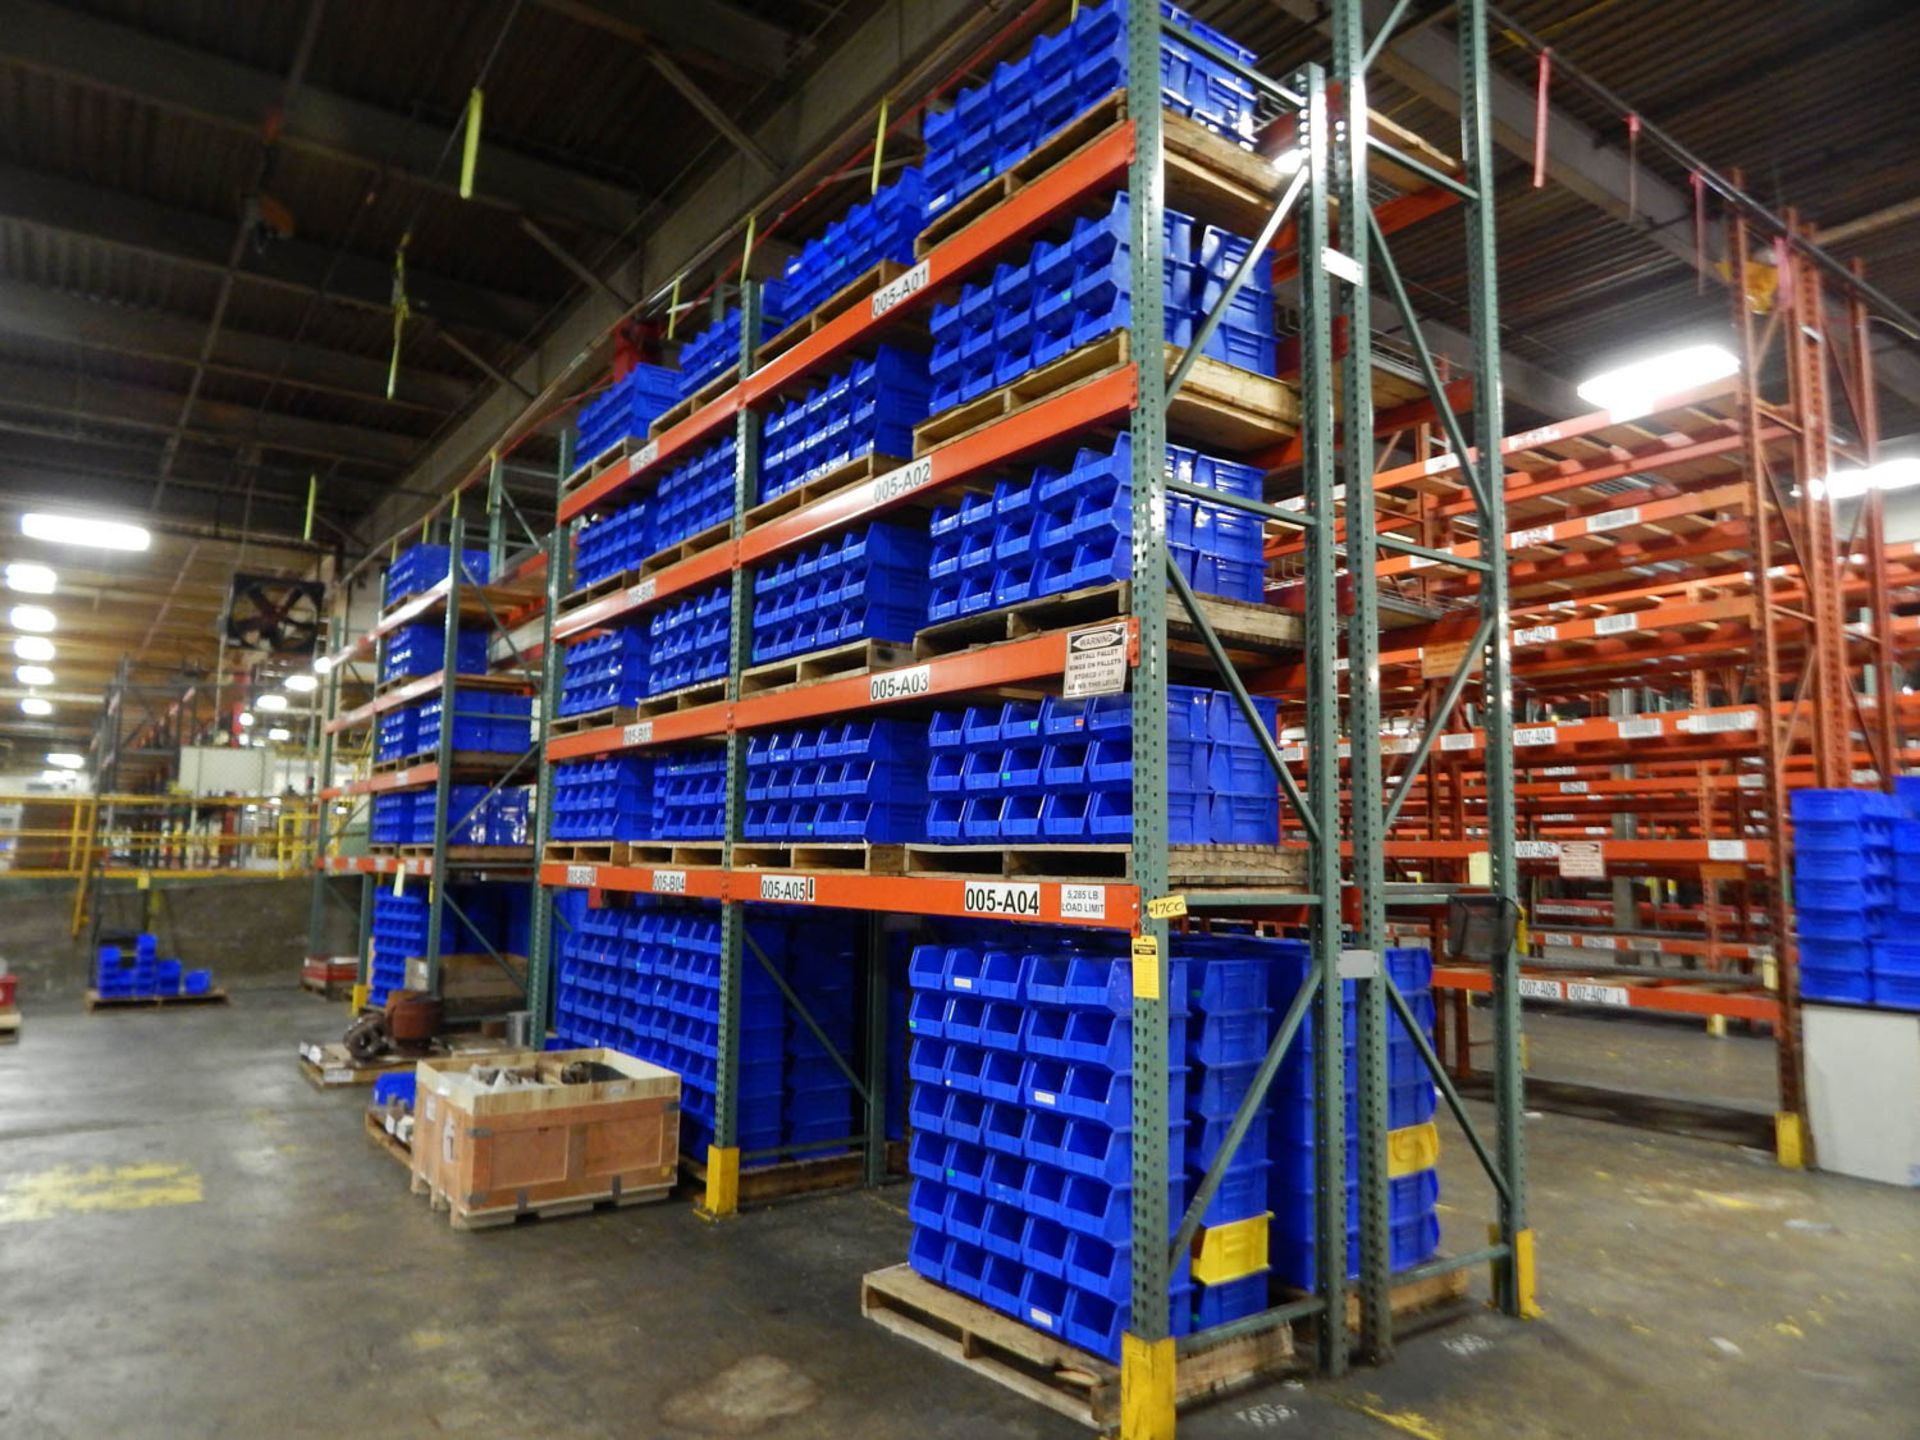 [19] SECTIONS 25' X 9' X 34'' PALLET RACKING